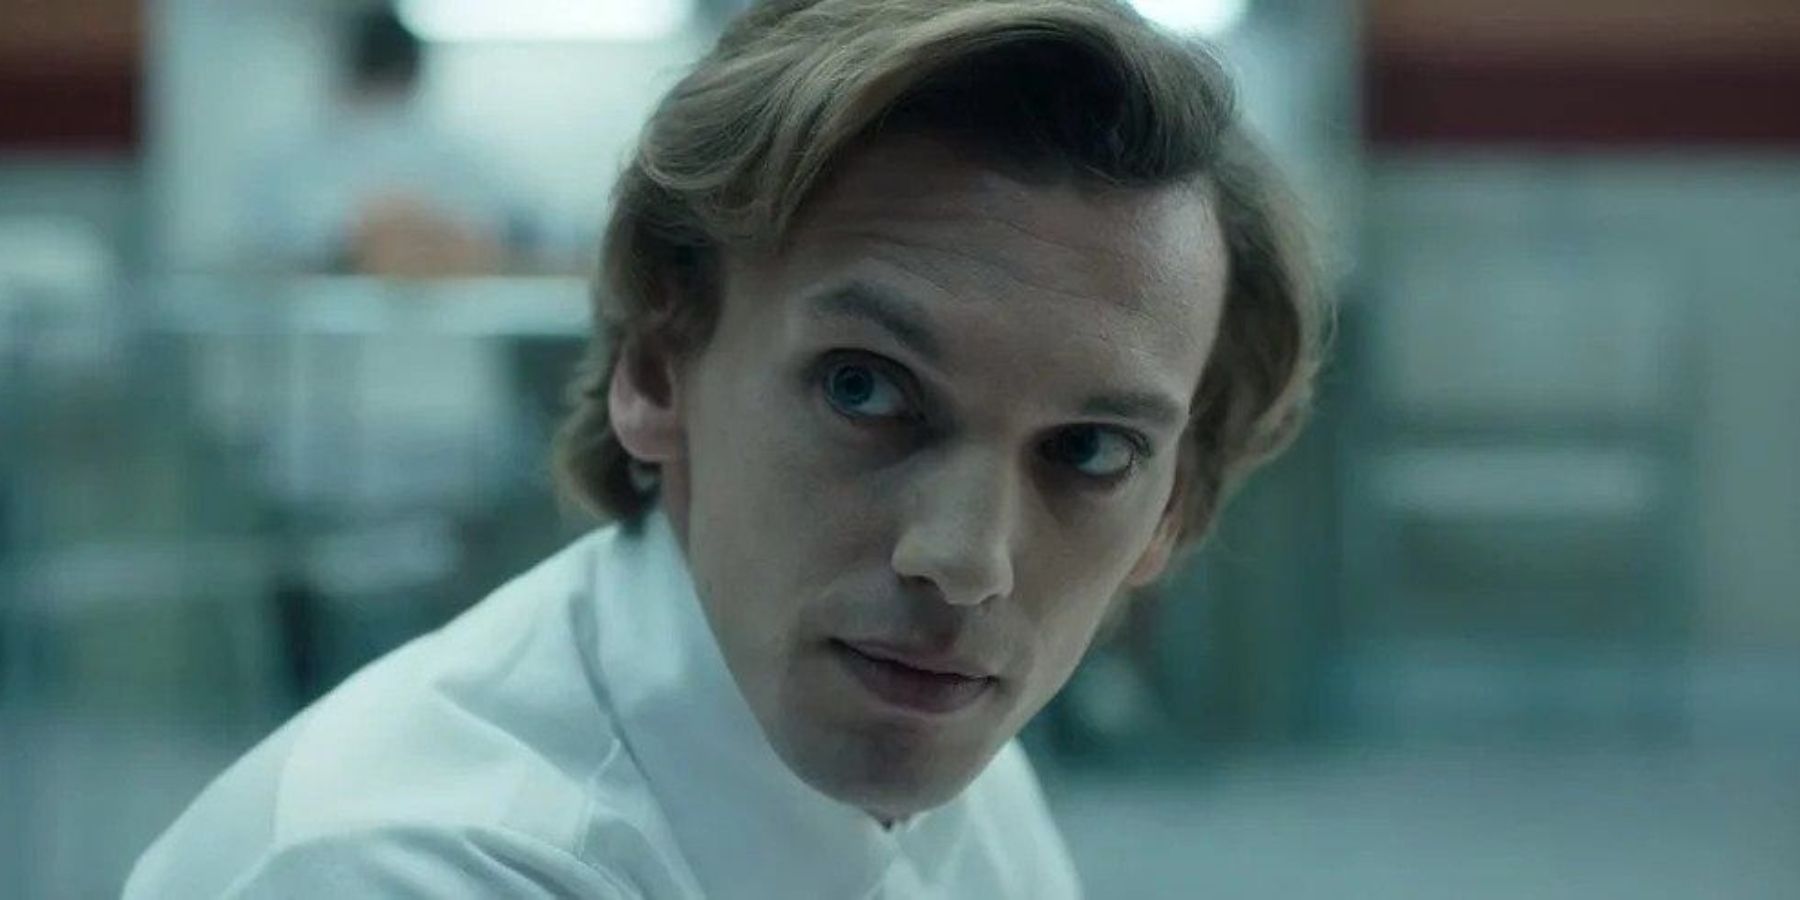 Jamie Campbell Bower as 001/Henry Creel on Stranger Things